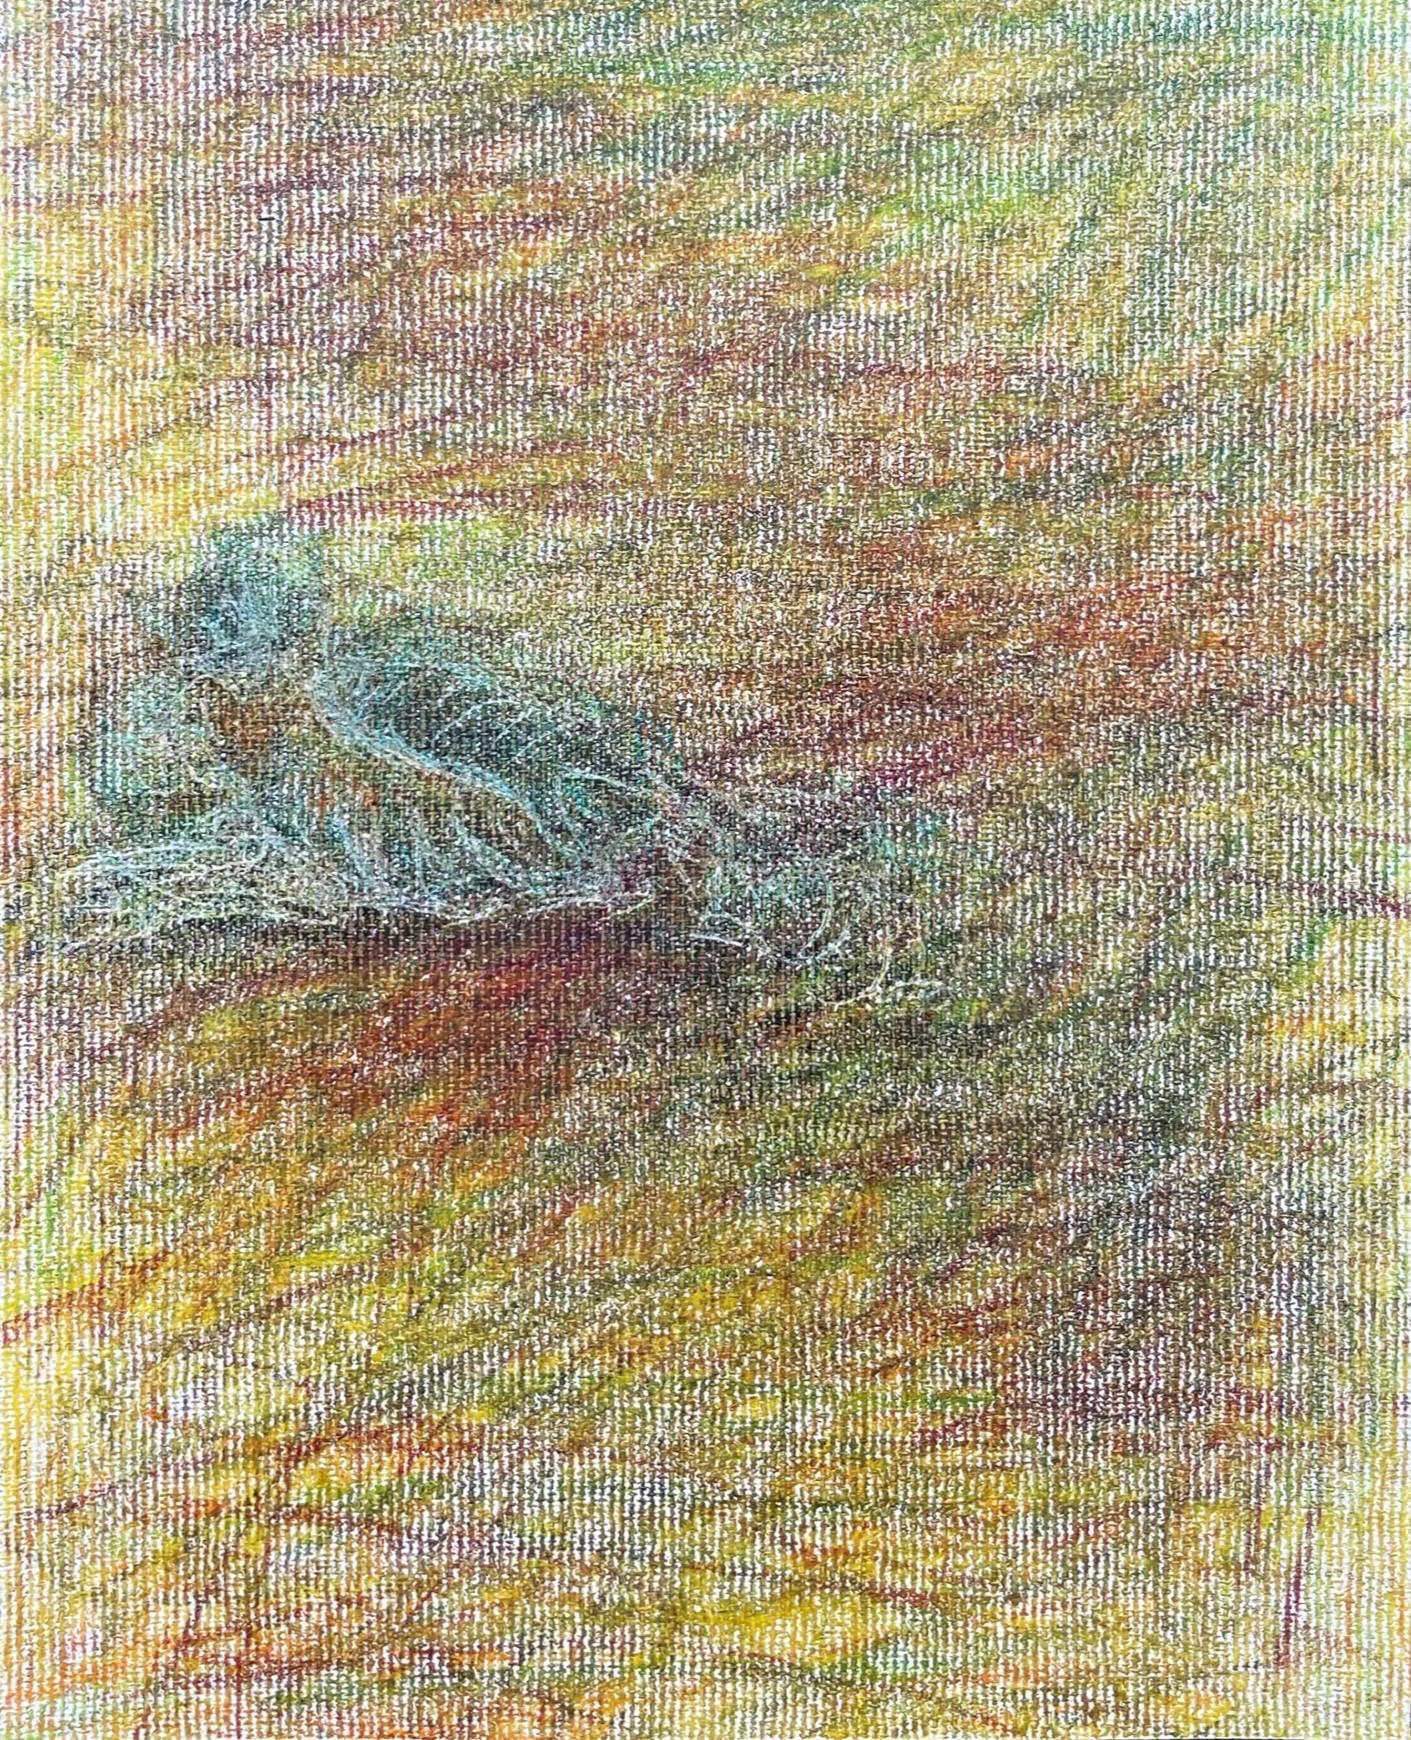 Body in the Field #11 - Landscape, Coloured Pencil, 21st Century, Red, Blue - Abstract Expressionist Art by Zsolt Berszán